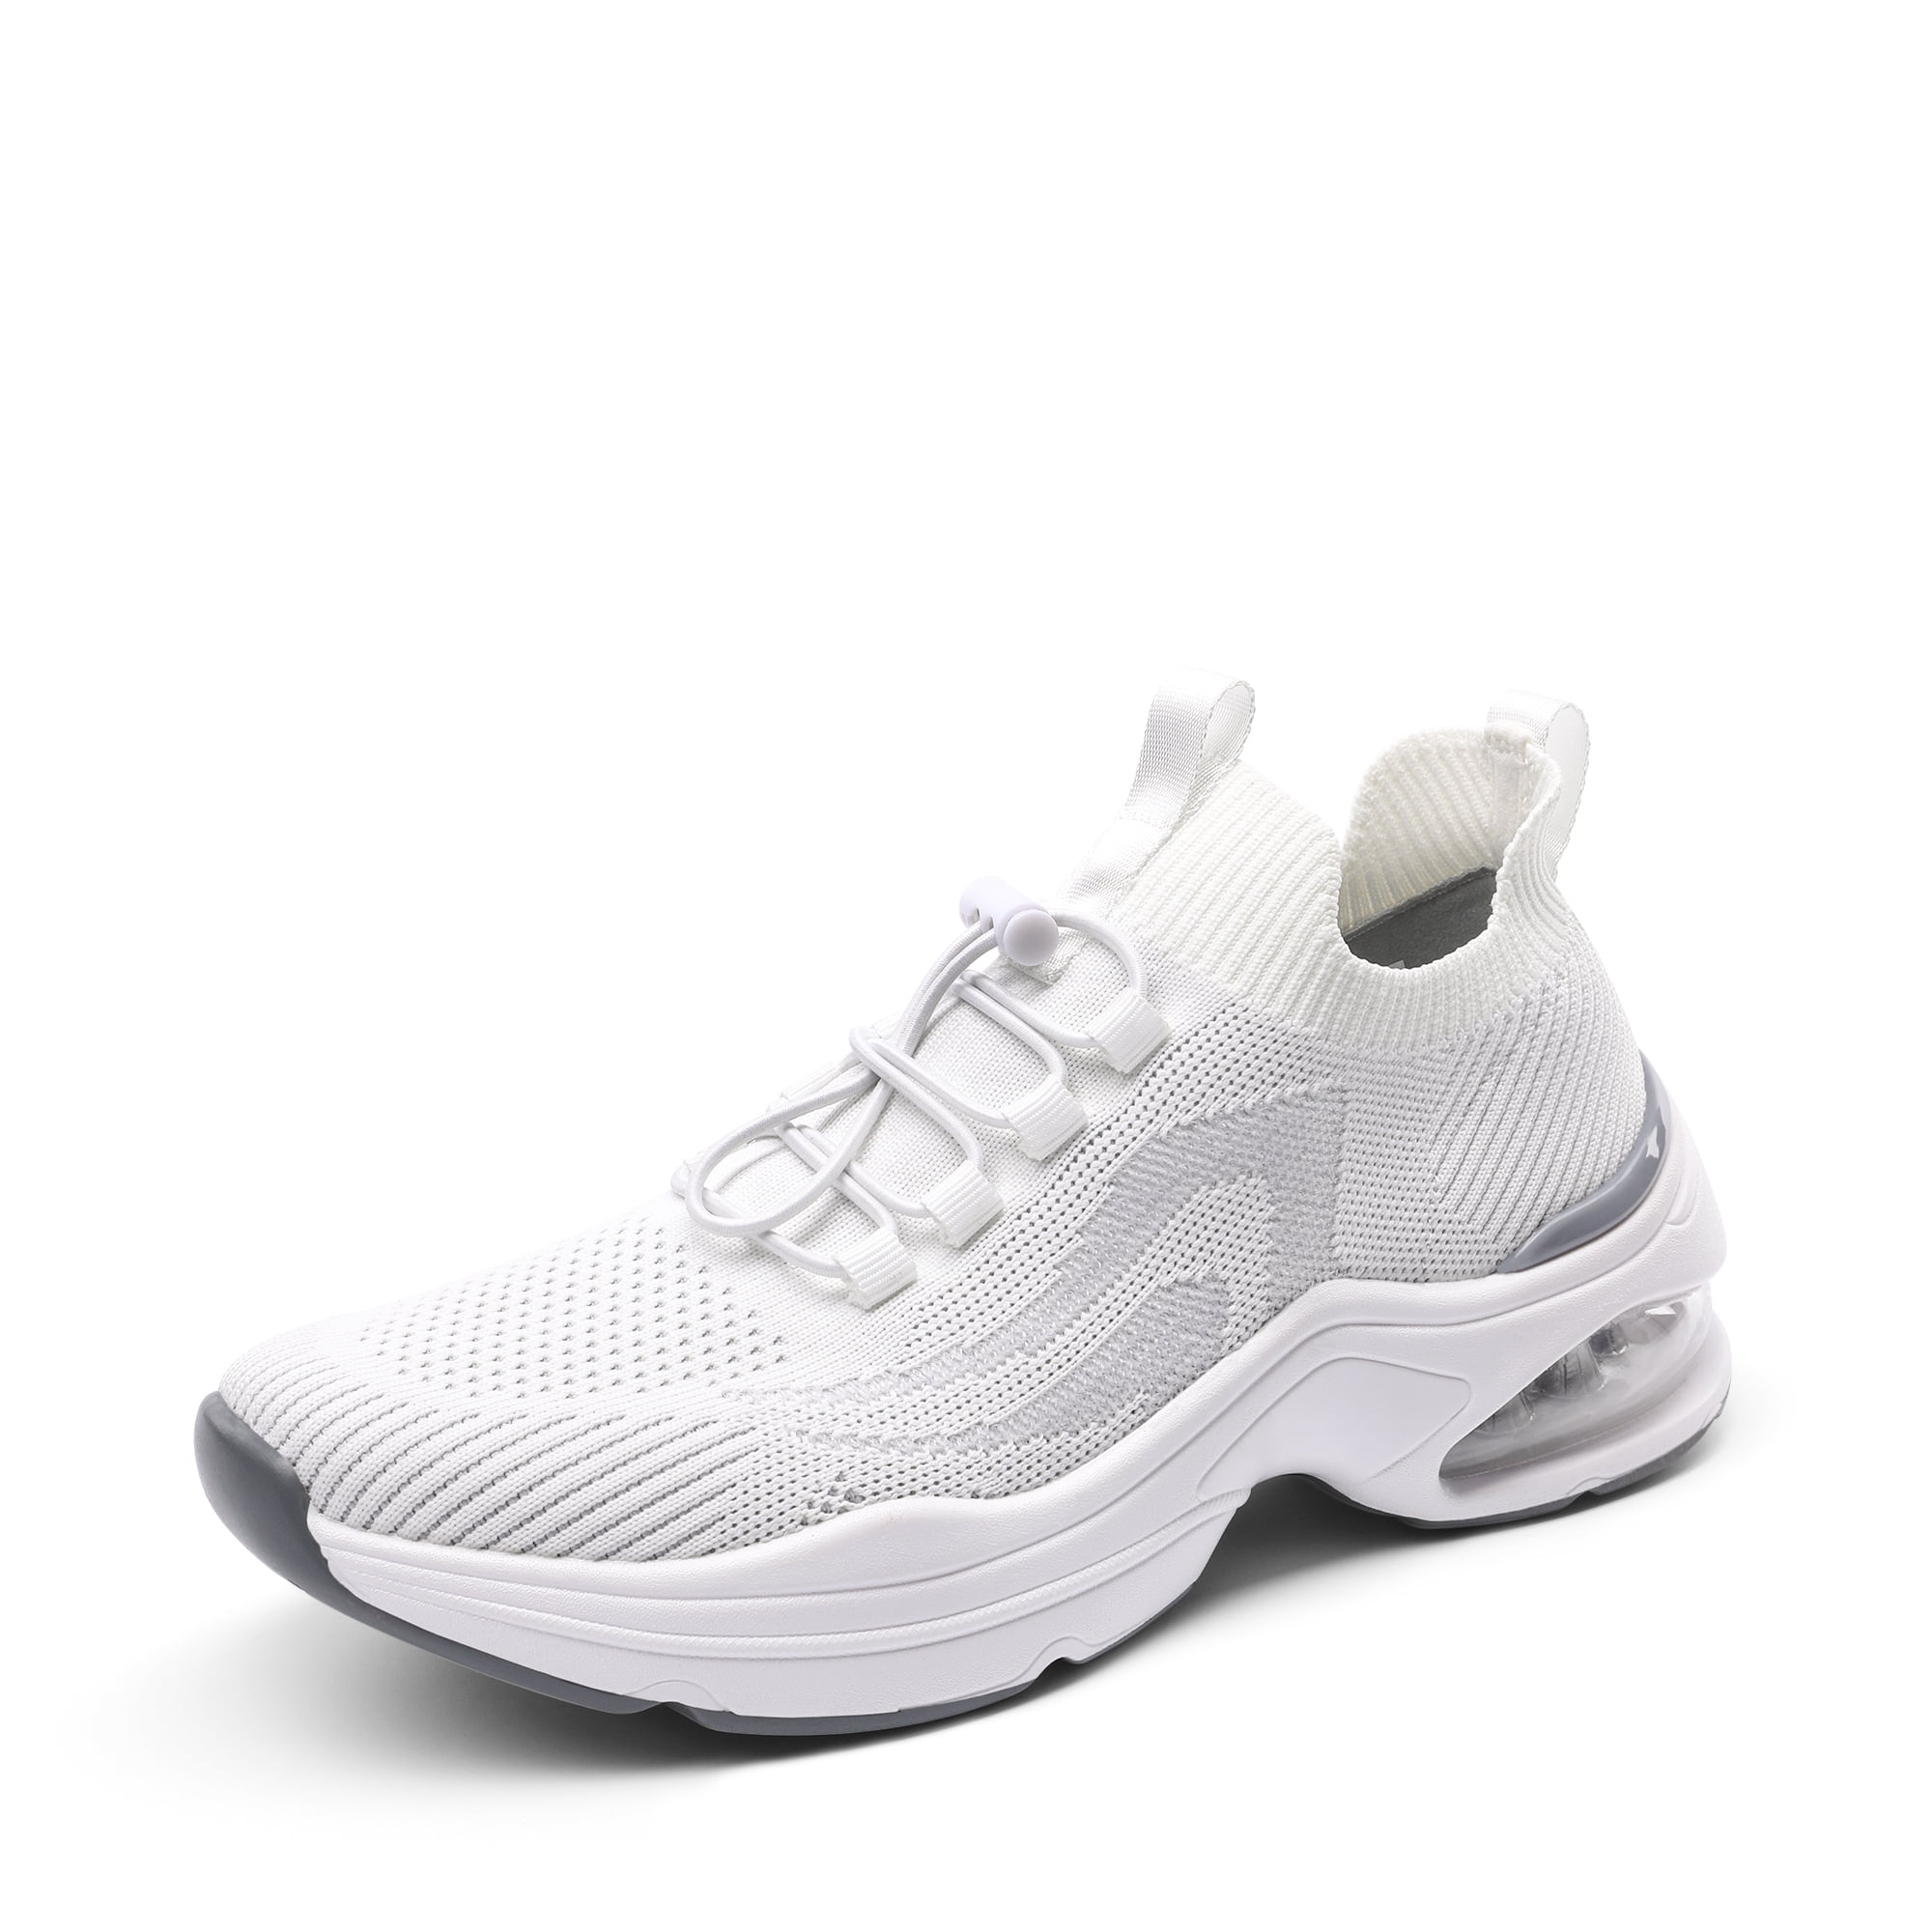 tennis shoes online shopping